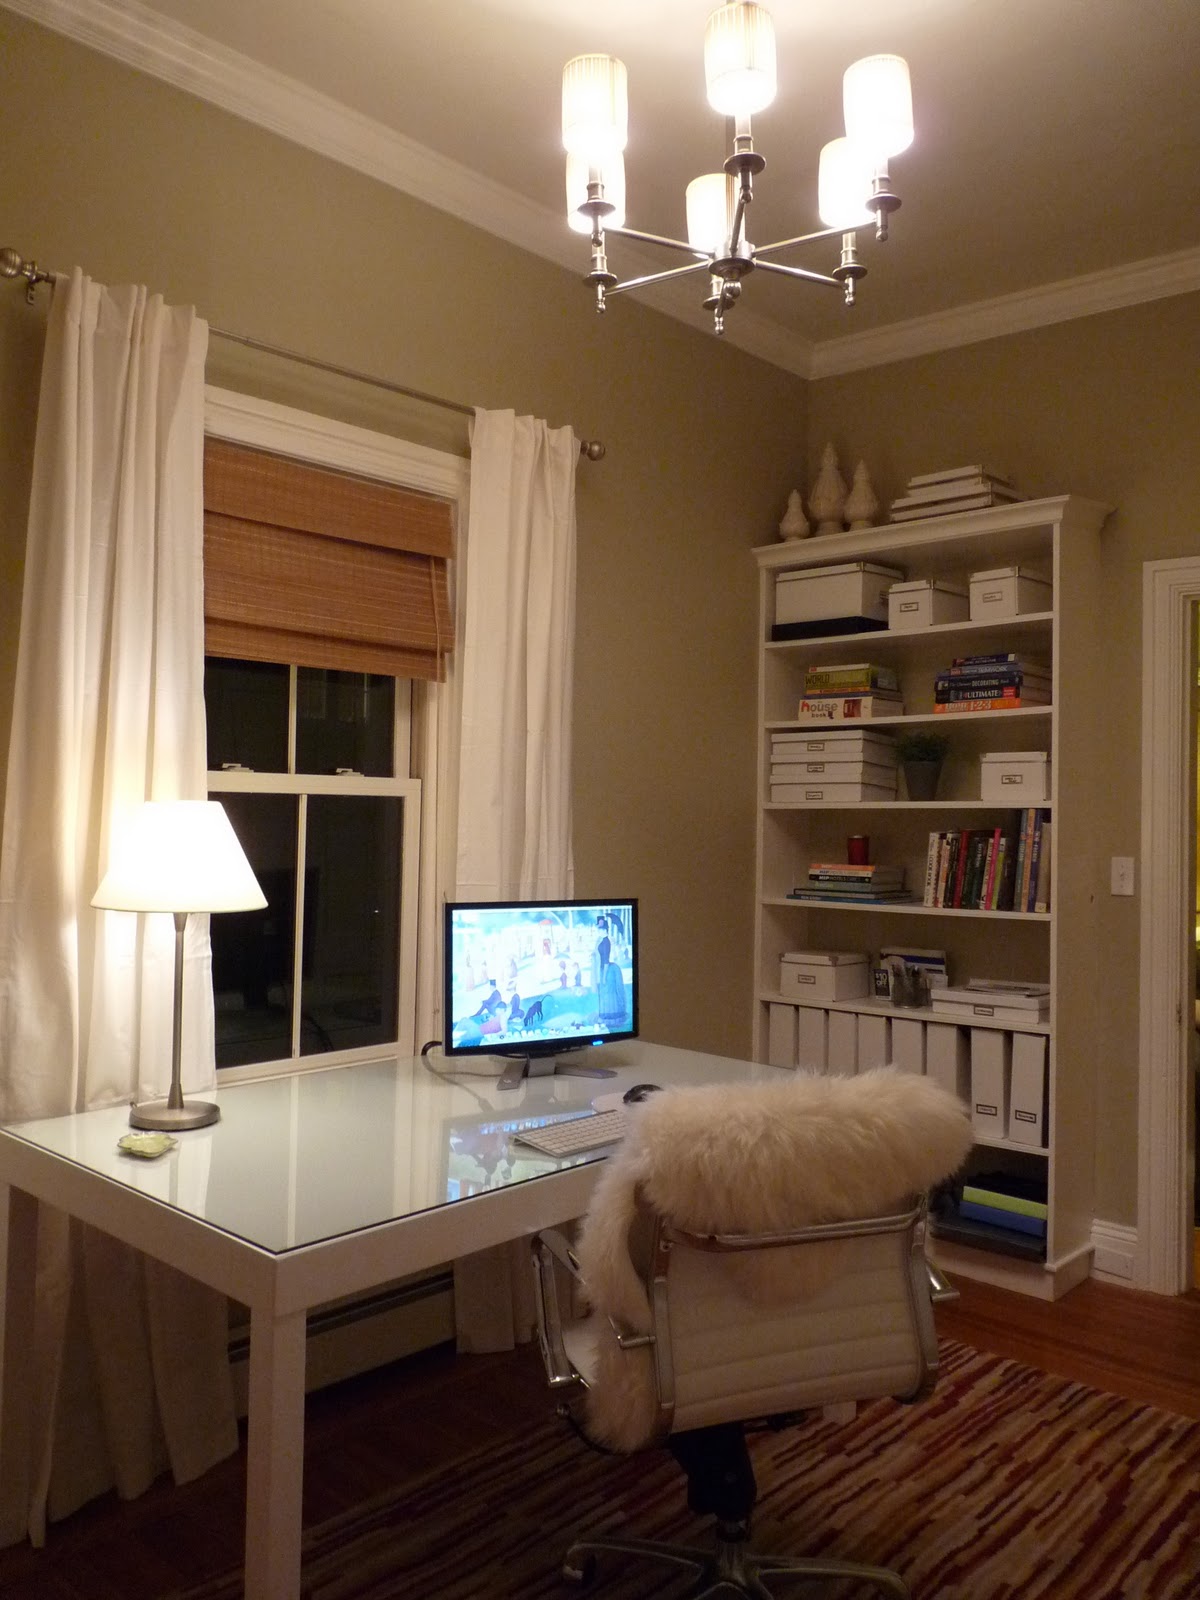 * Remodelaholic *: Updated Style Home Office Renovation